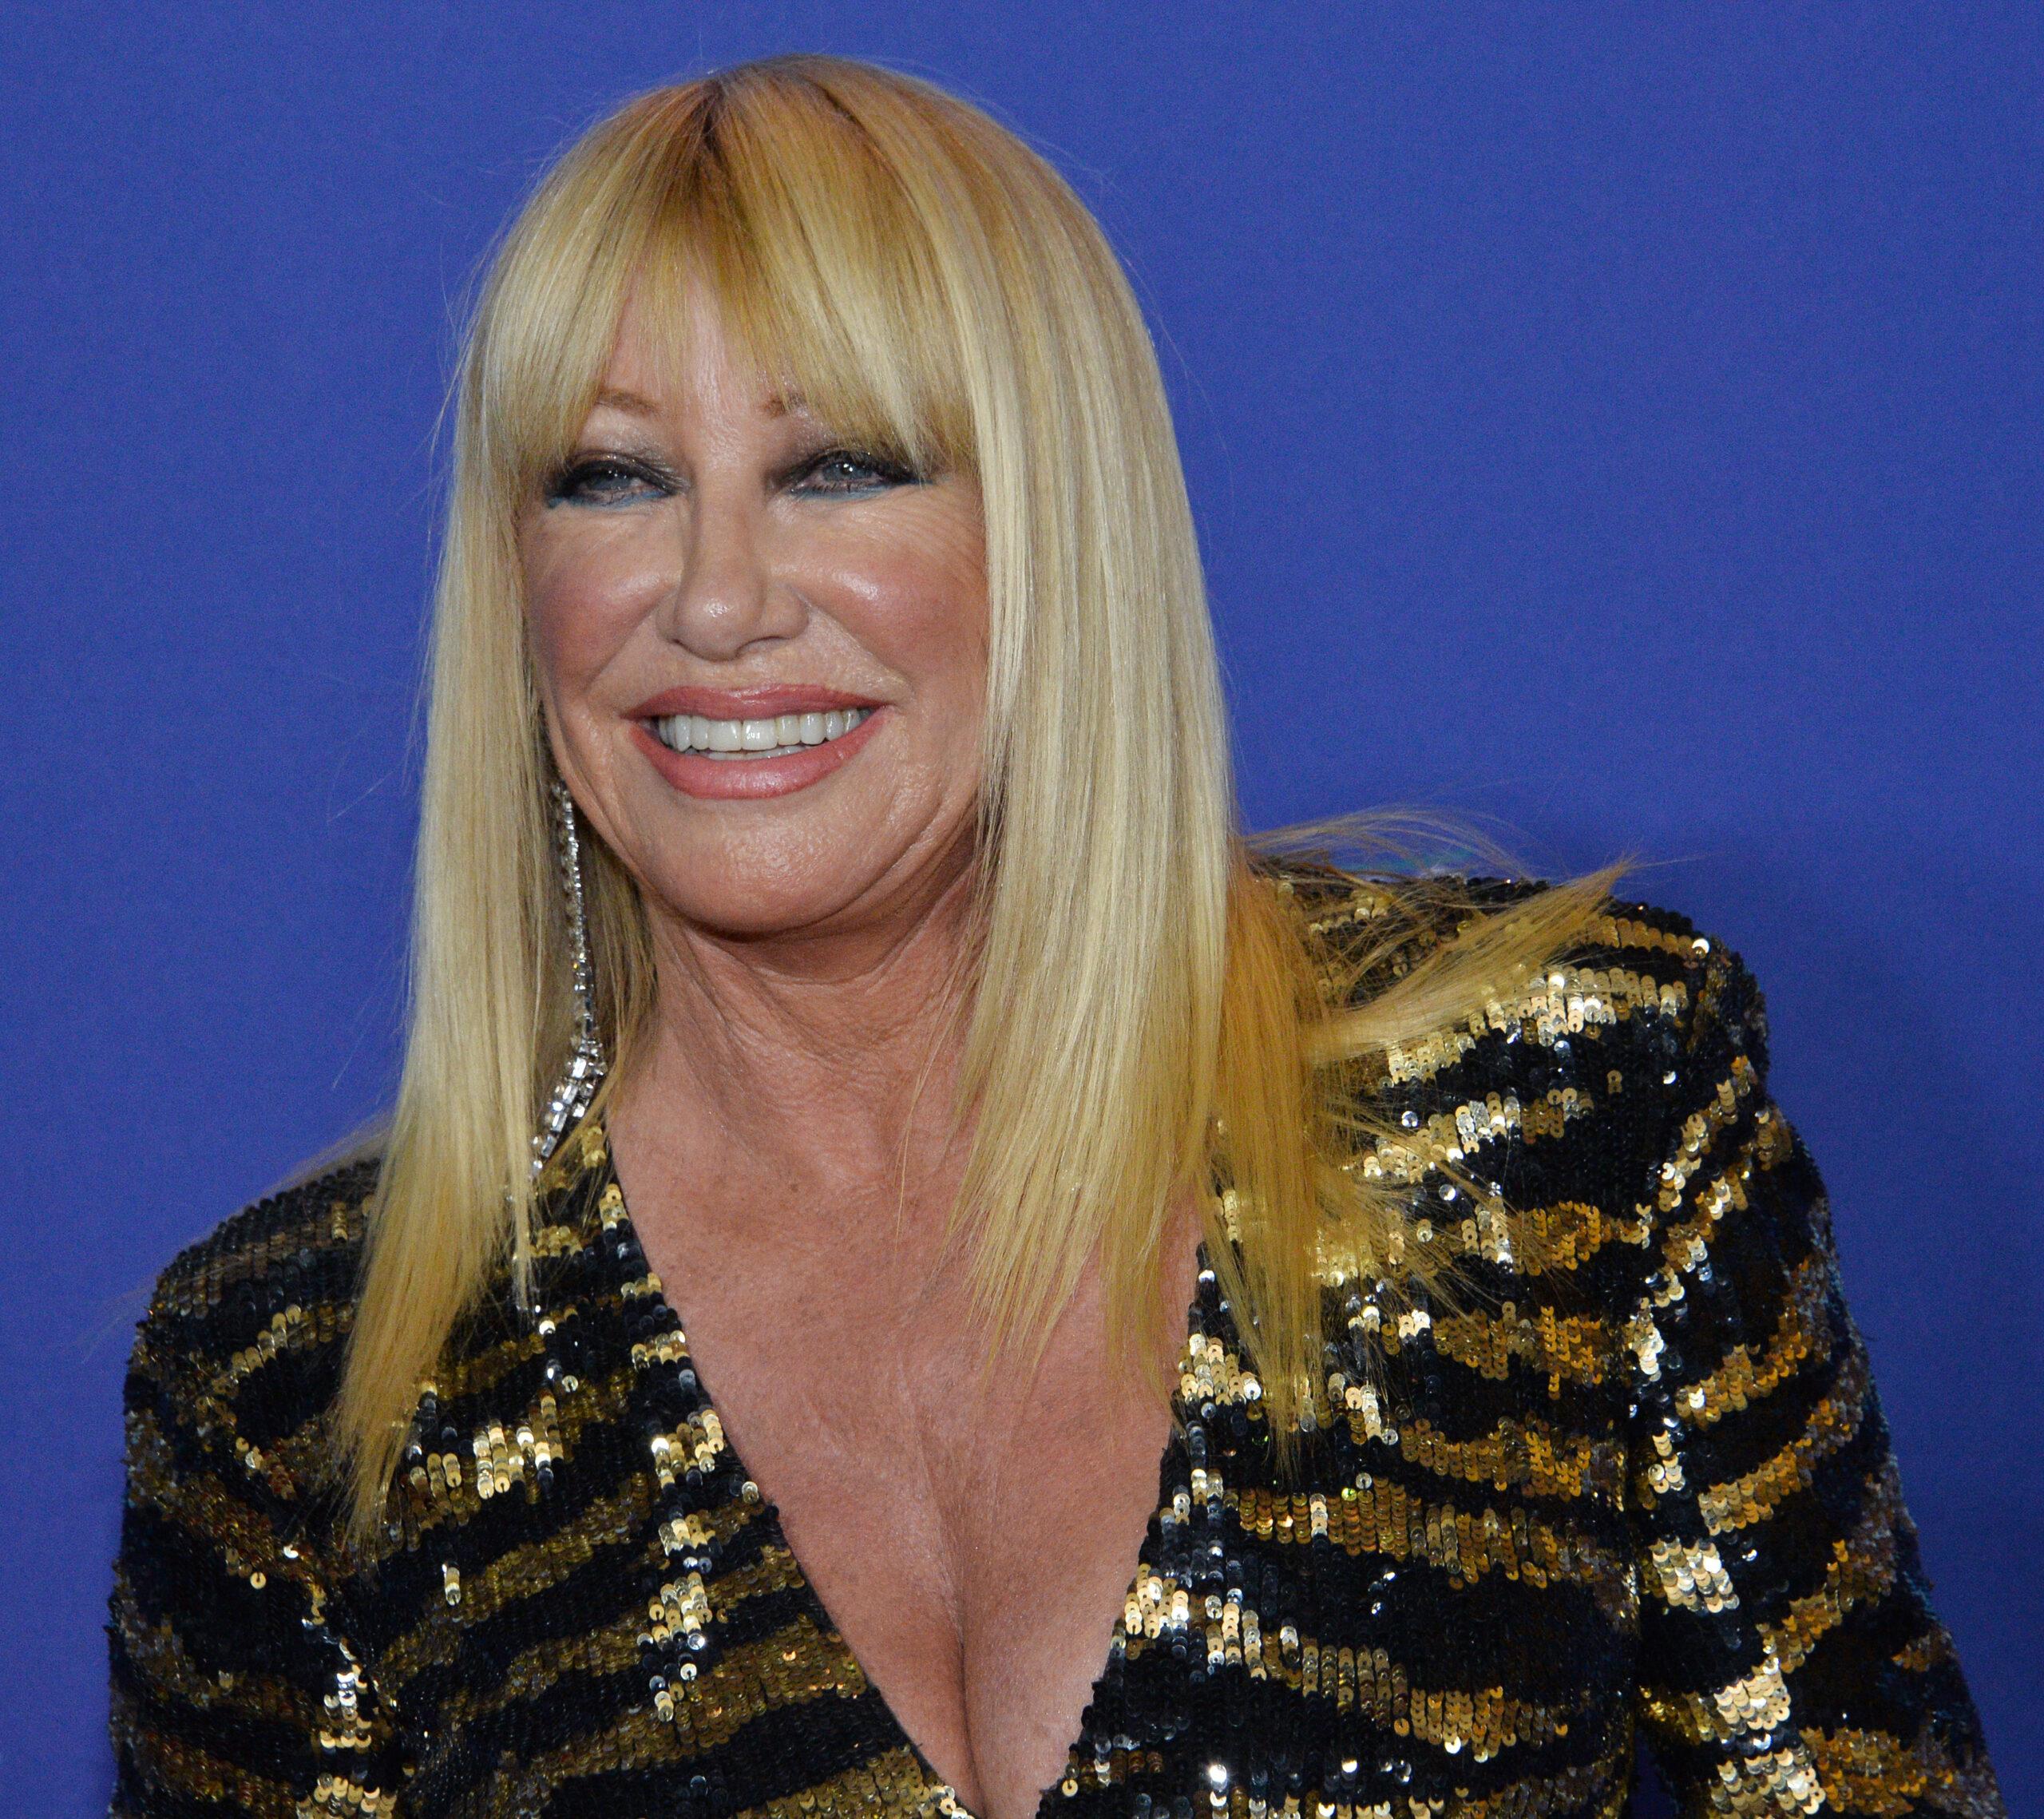 Suzanne Somers attends the Palm Springs International Film Festival in Palm Springs